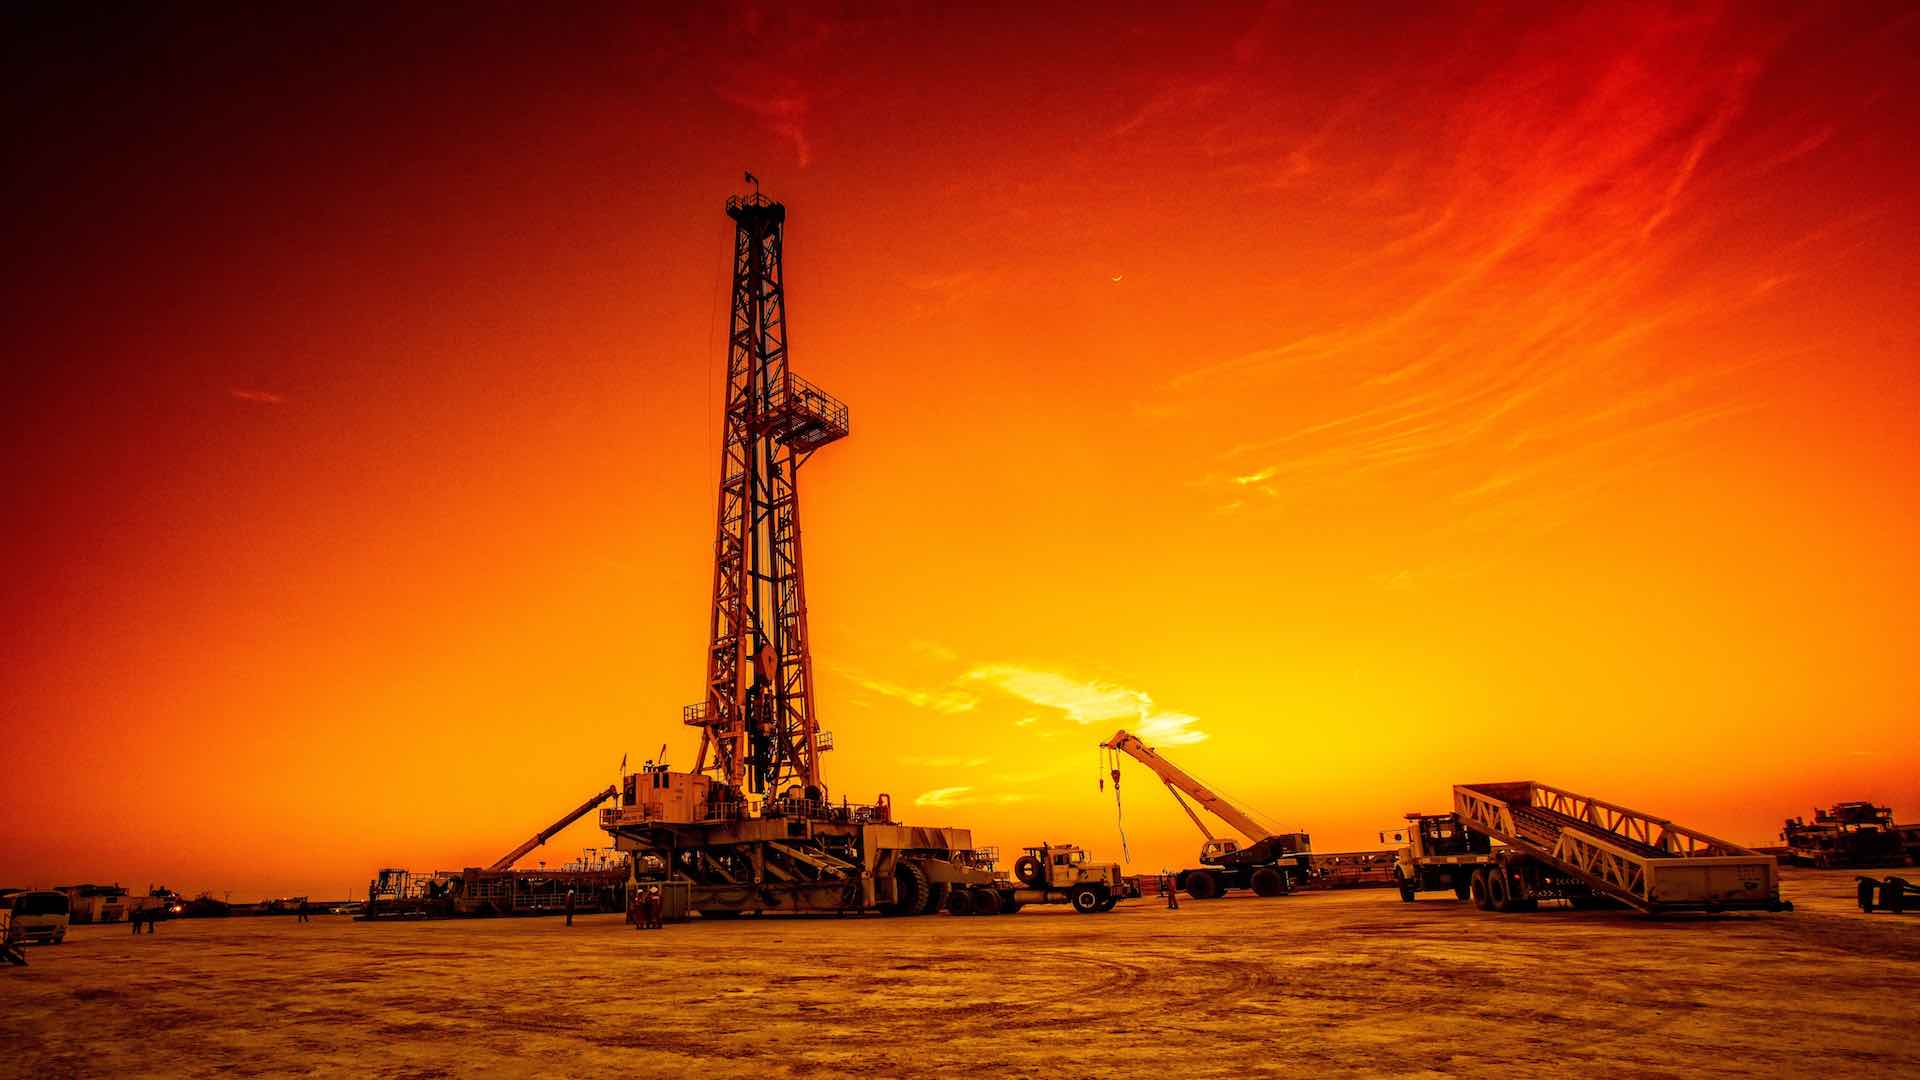 Analysts foresee $90 oil prices due to rising Middle East conflicts